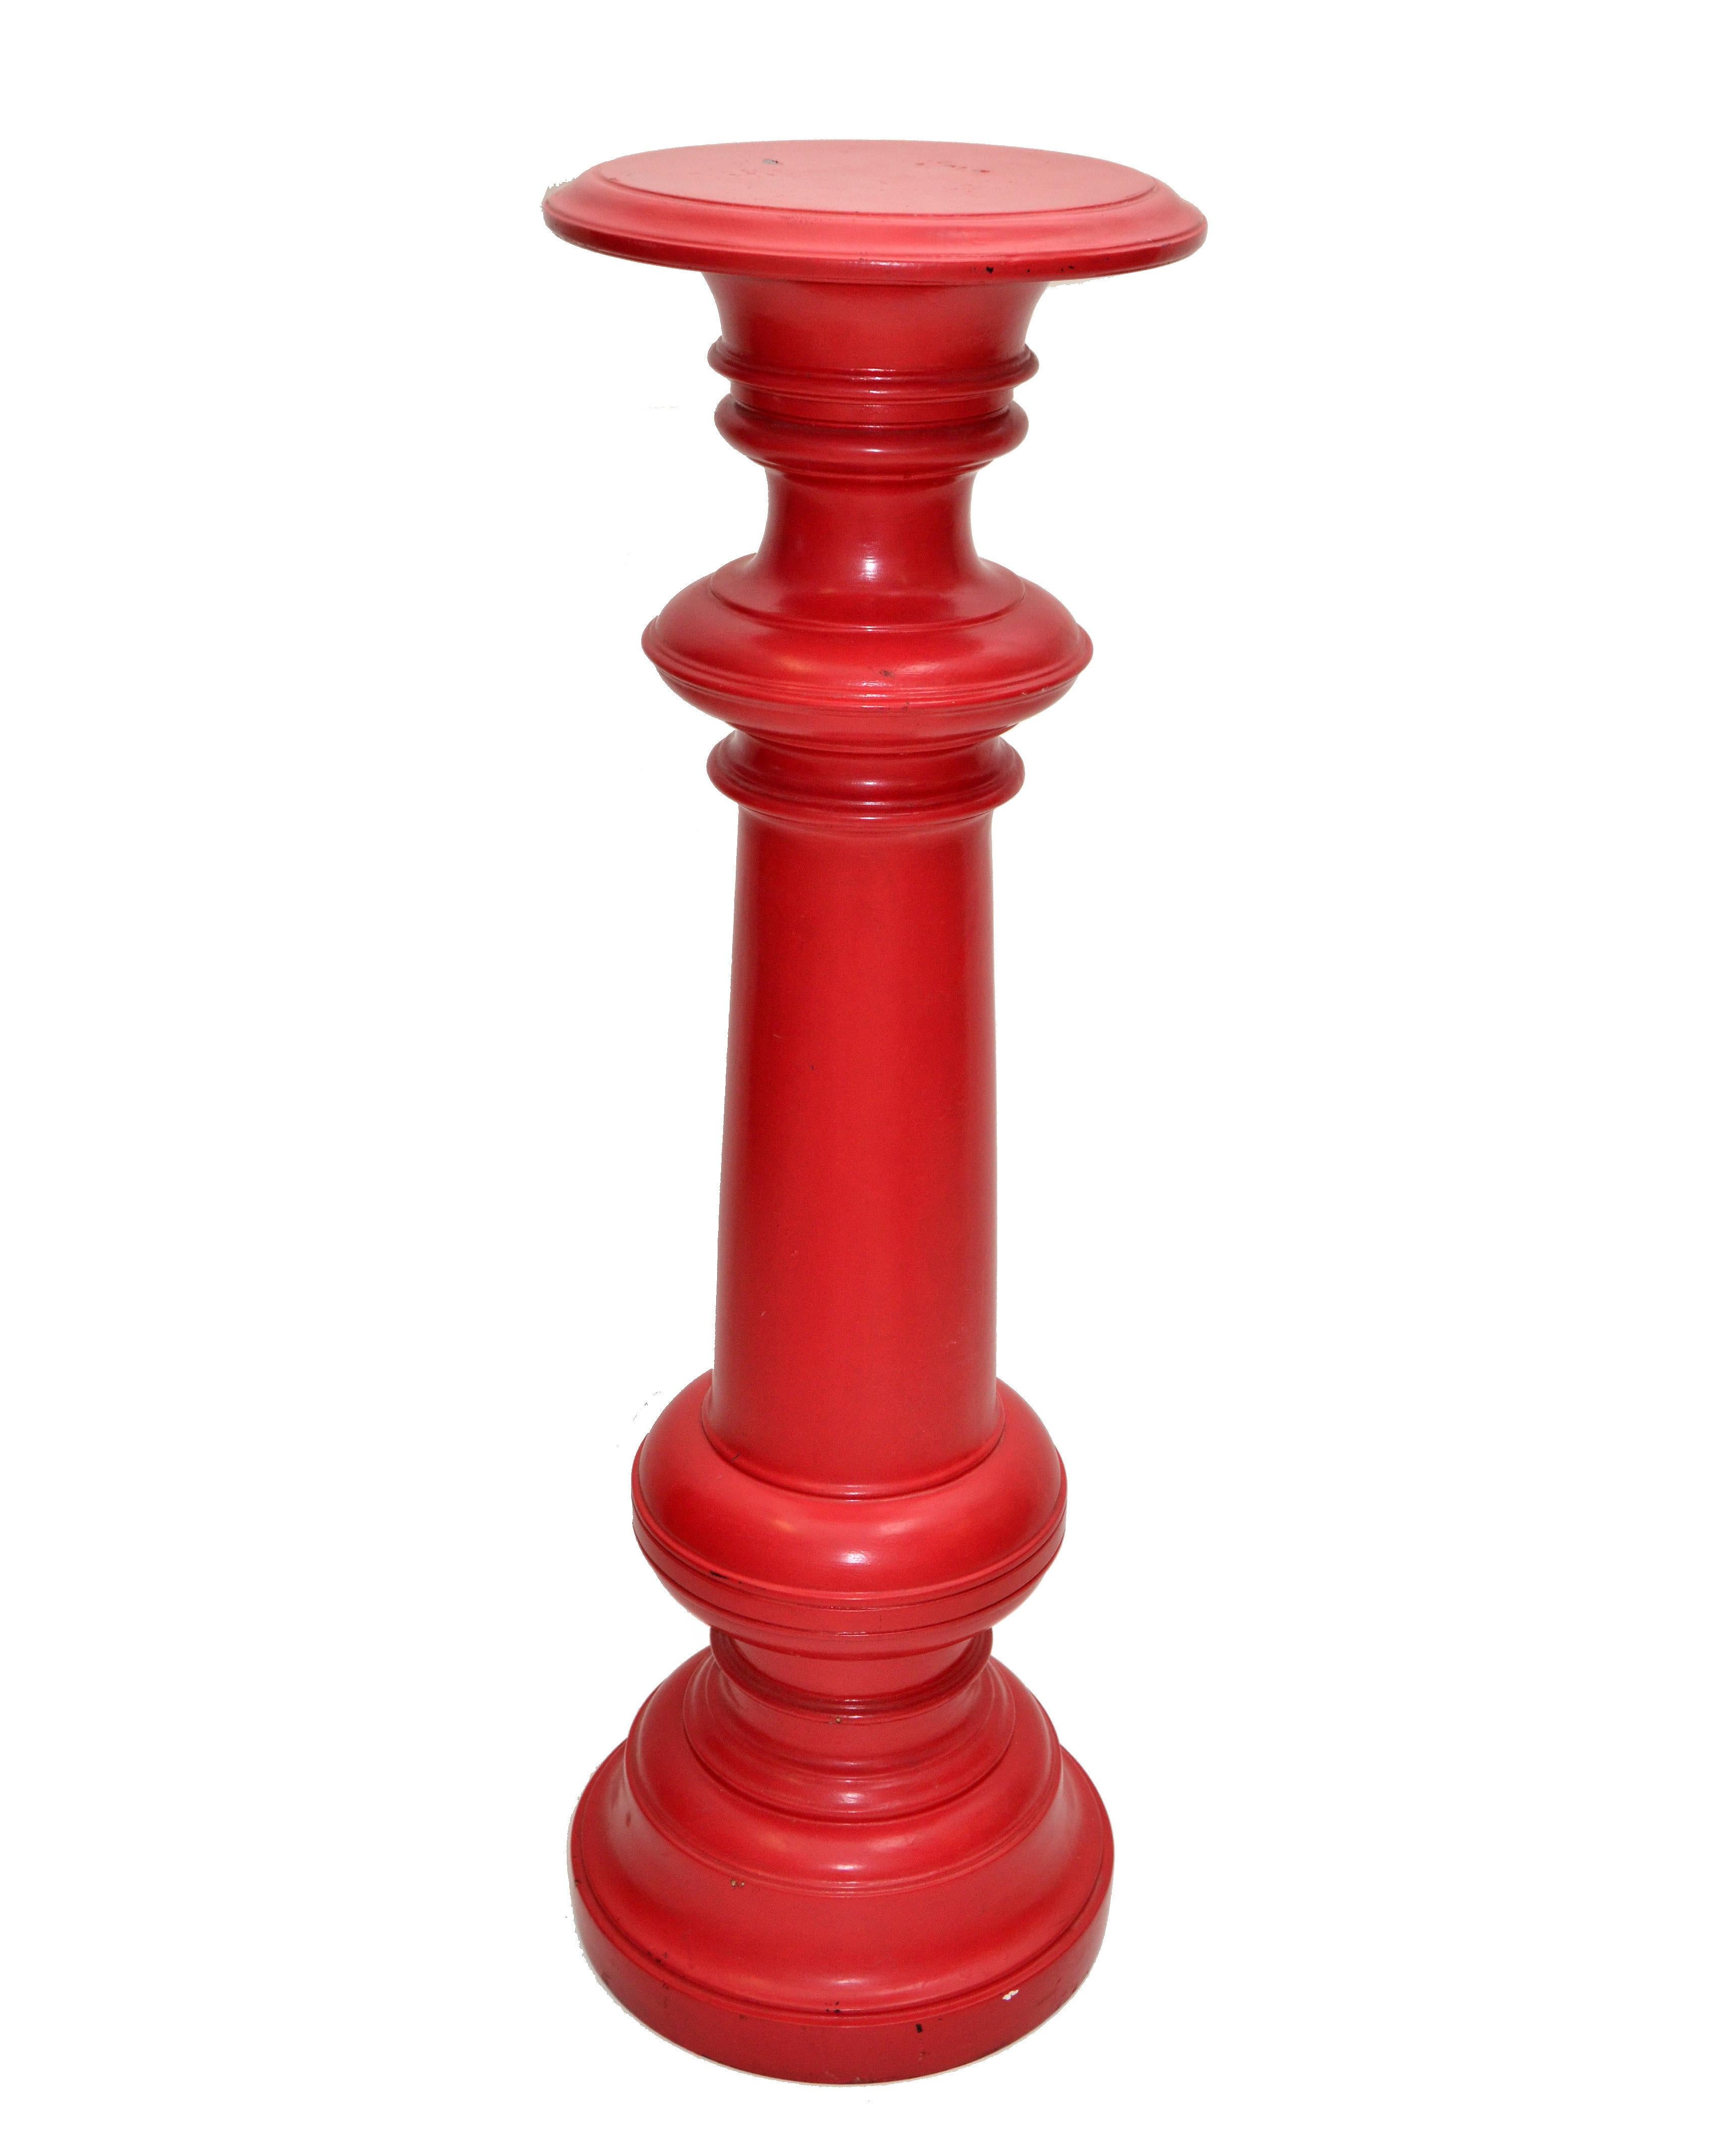 Tall Mid-Century Modern Turned Wood Red Finish Plant Stand Sculpture Pedestal For Sale 5